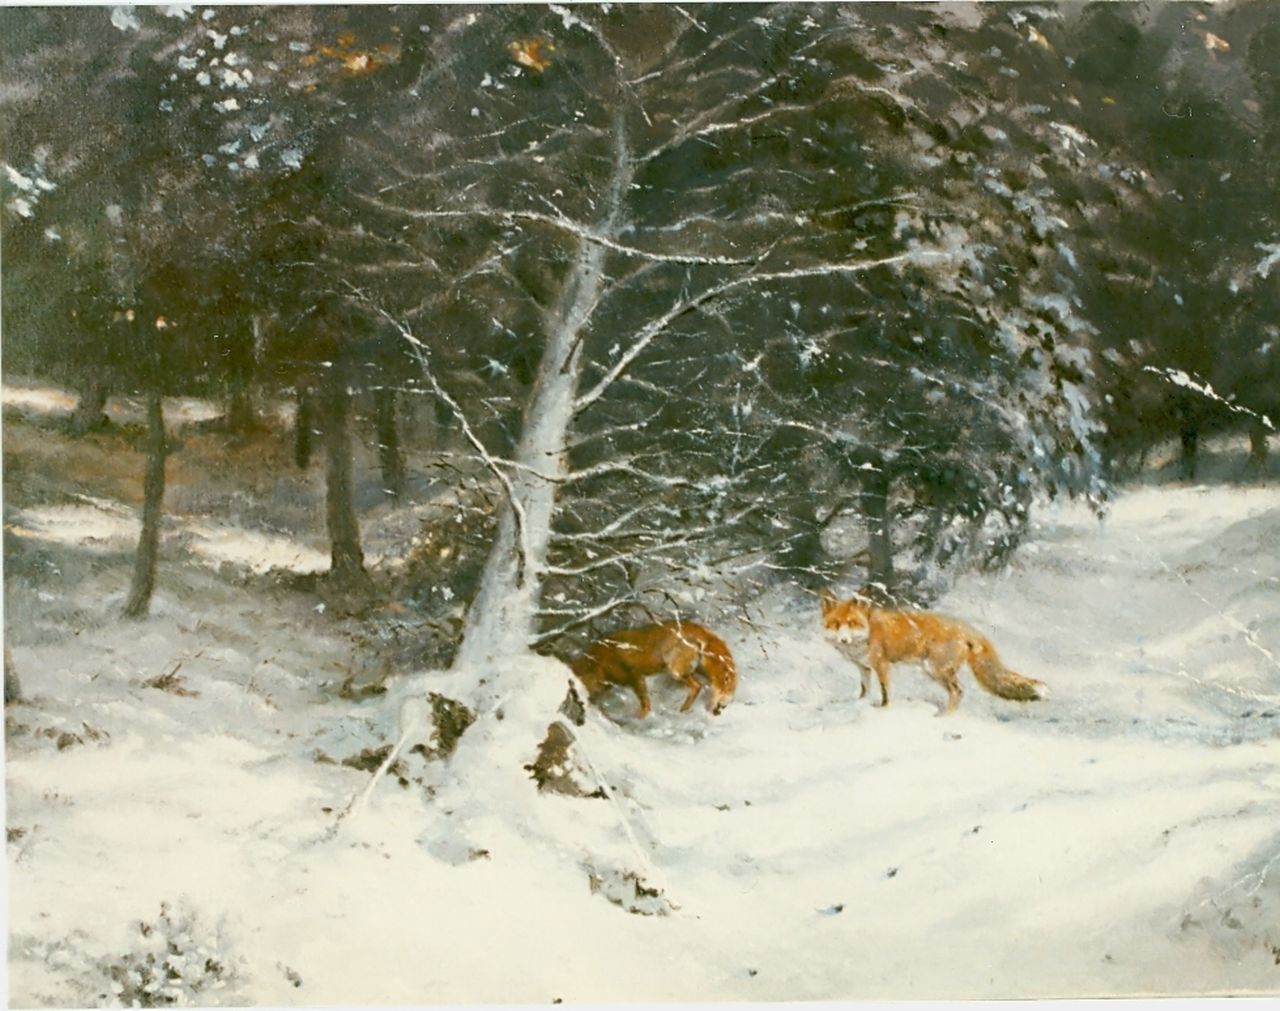 Poortvliet R.  | Rien Poortvliet, Foxes in a snow-covered landscape, oil on canvas 60.5 x 80.0 cm, signed l.r.